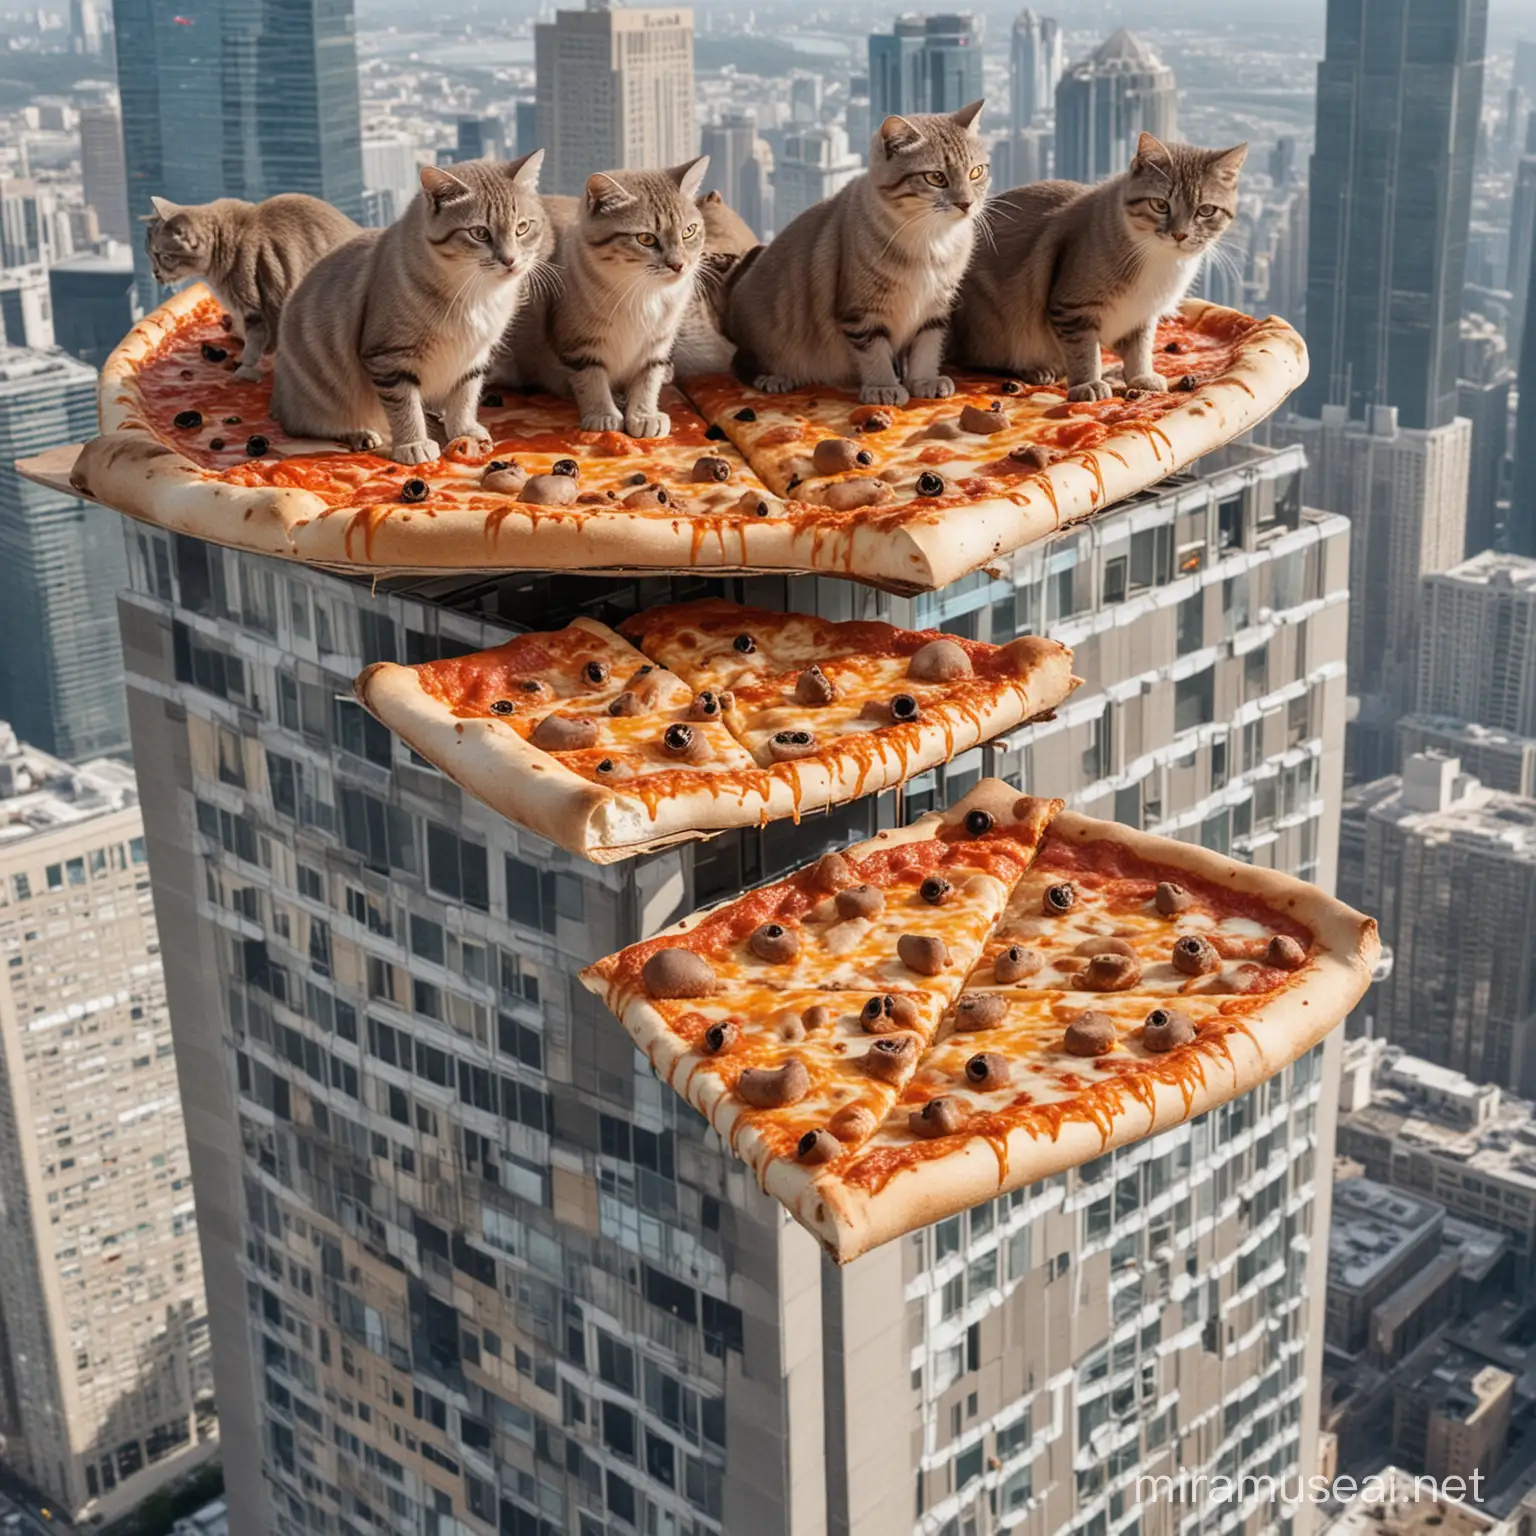 Cats and otters eating a gigantic pizza on the top of a skyscraper